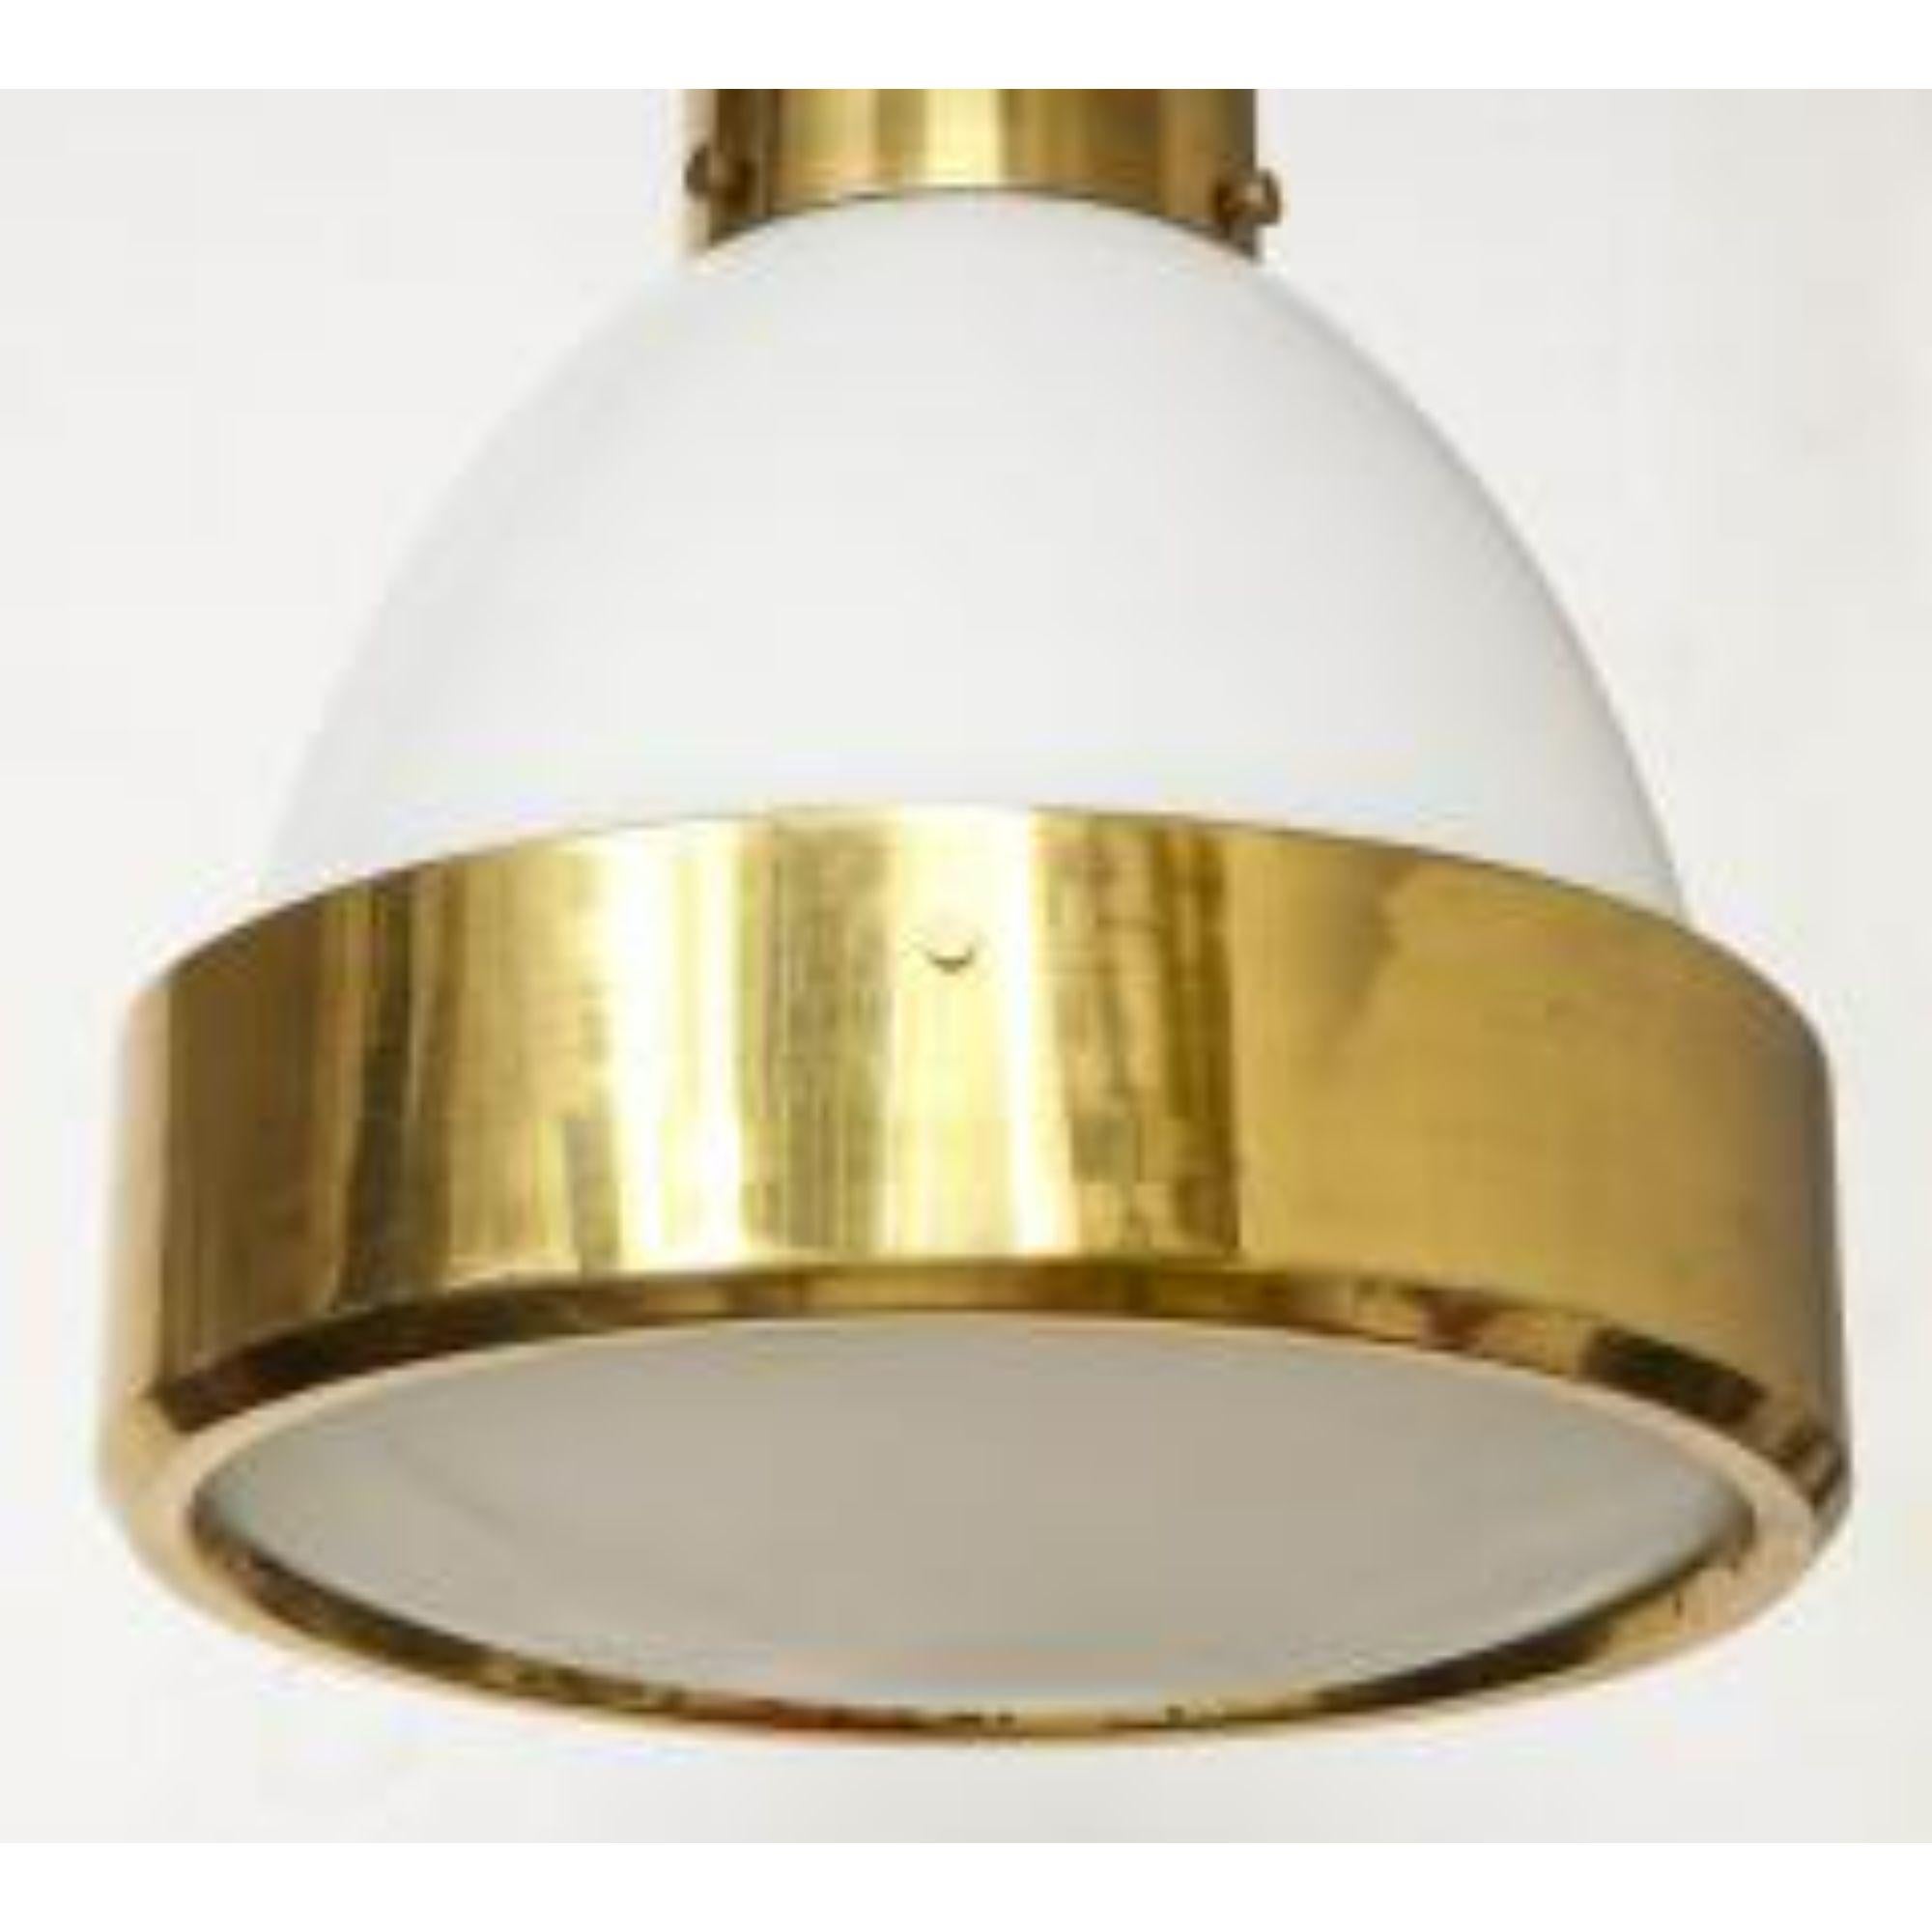 Midcentury Pendant in Brass and White Opaline Glass, Mid-20th Century For Sale 4